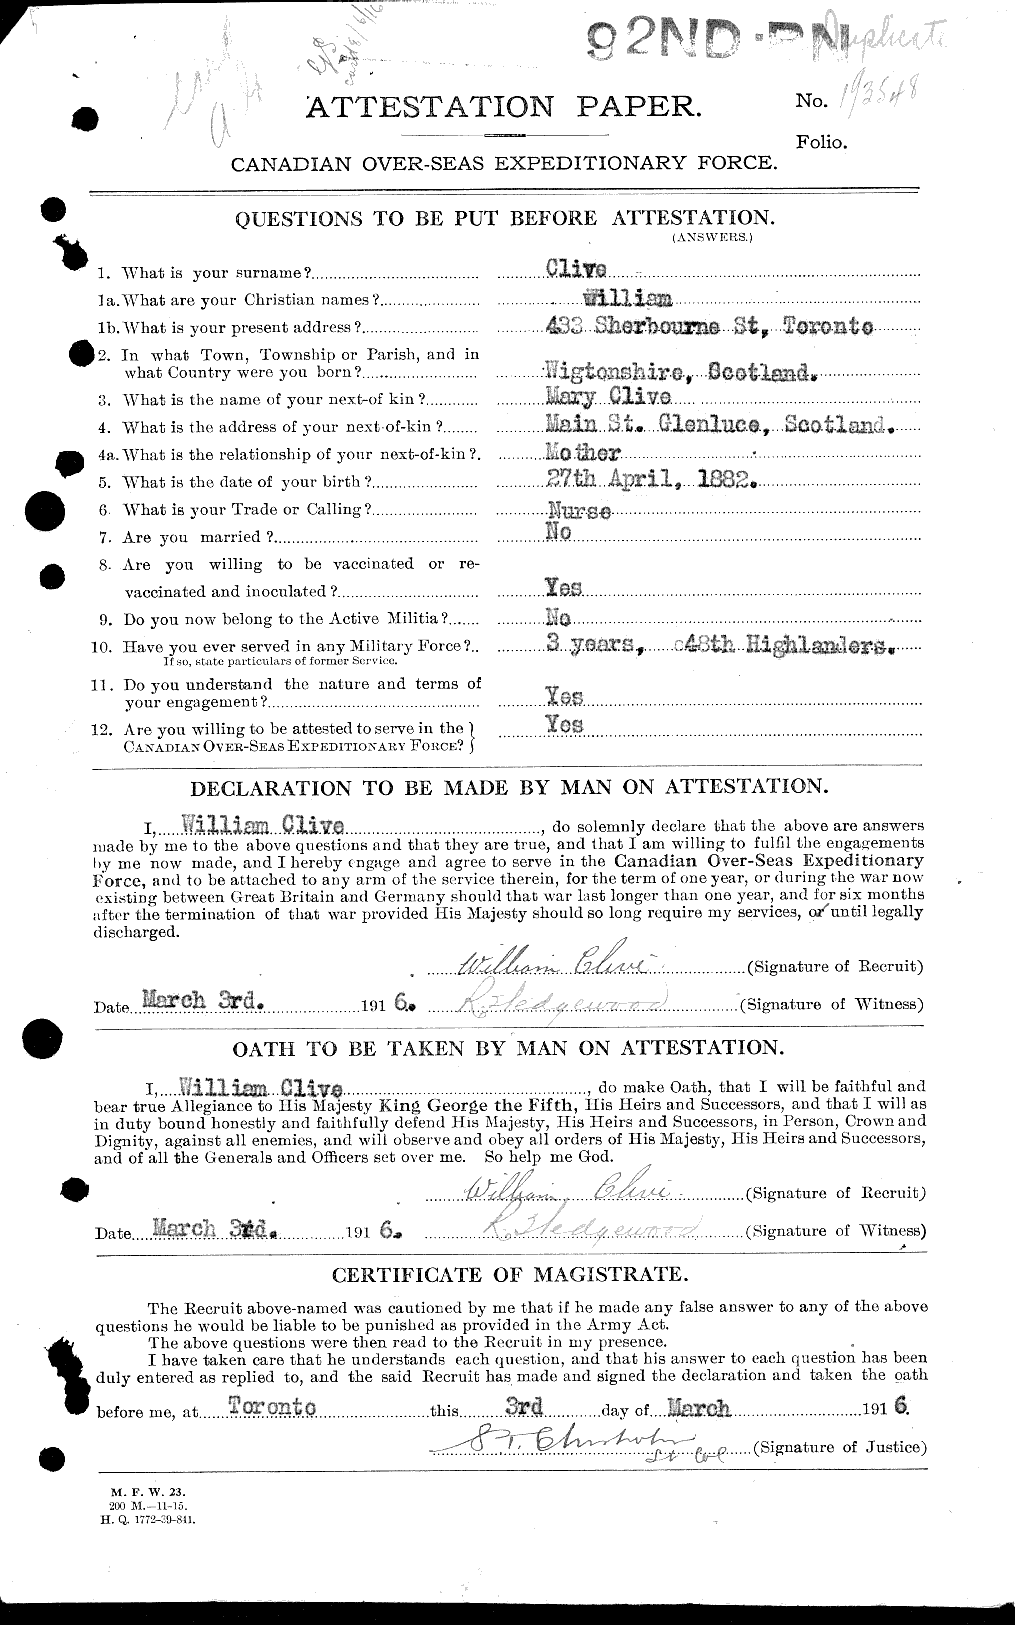 Personnel Records of the First World War - CEF 025429a